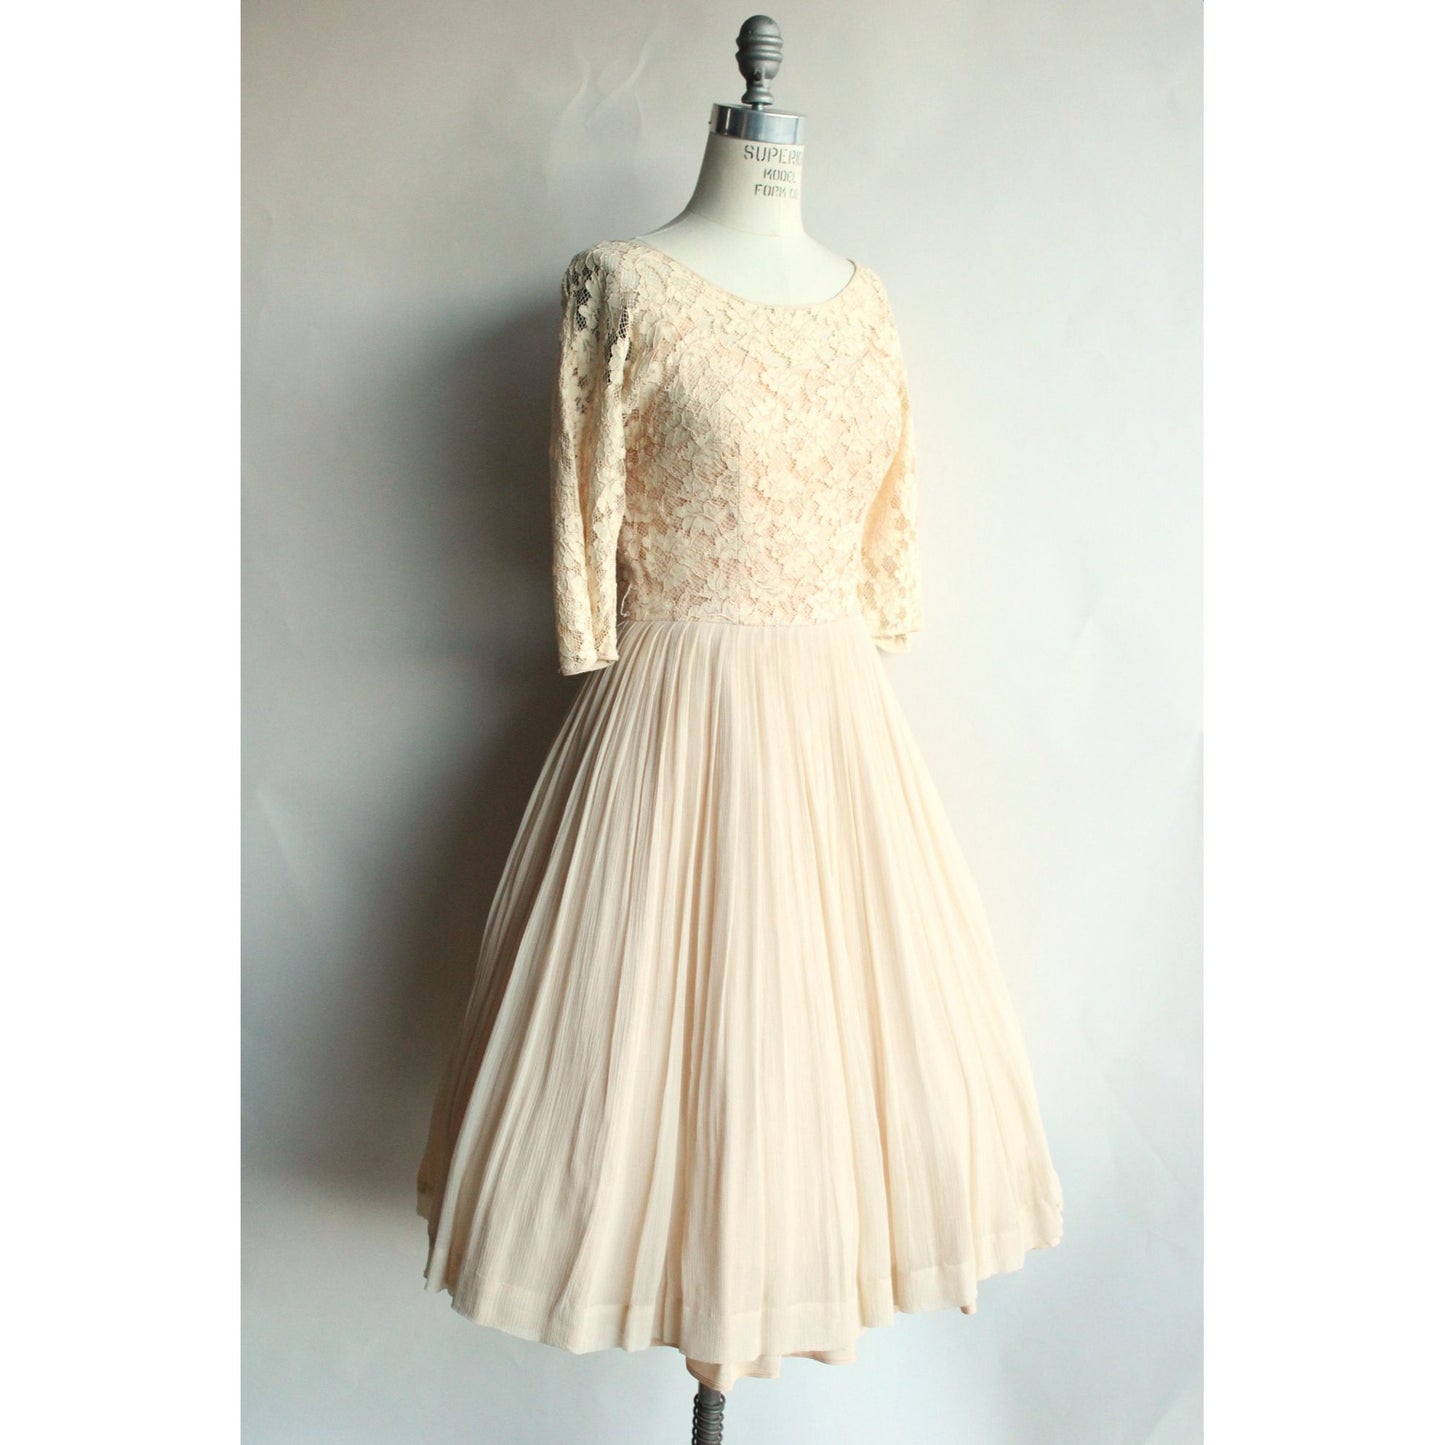 Vintage 1960s Fit and Flare Ivory Illusion Lace And Chiffon Dress